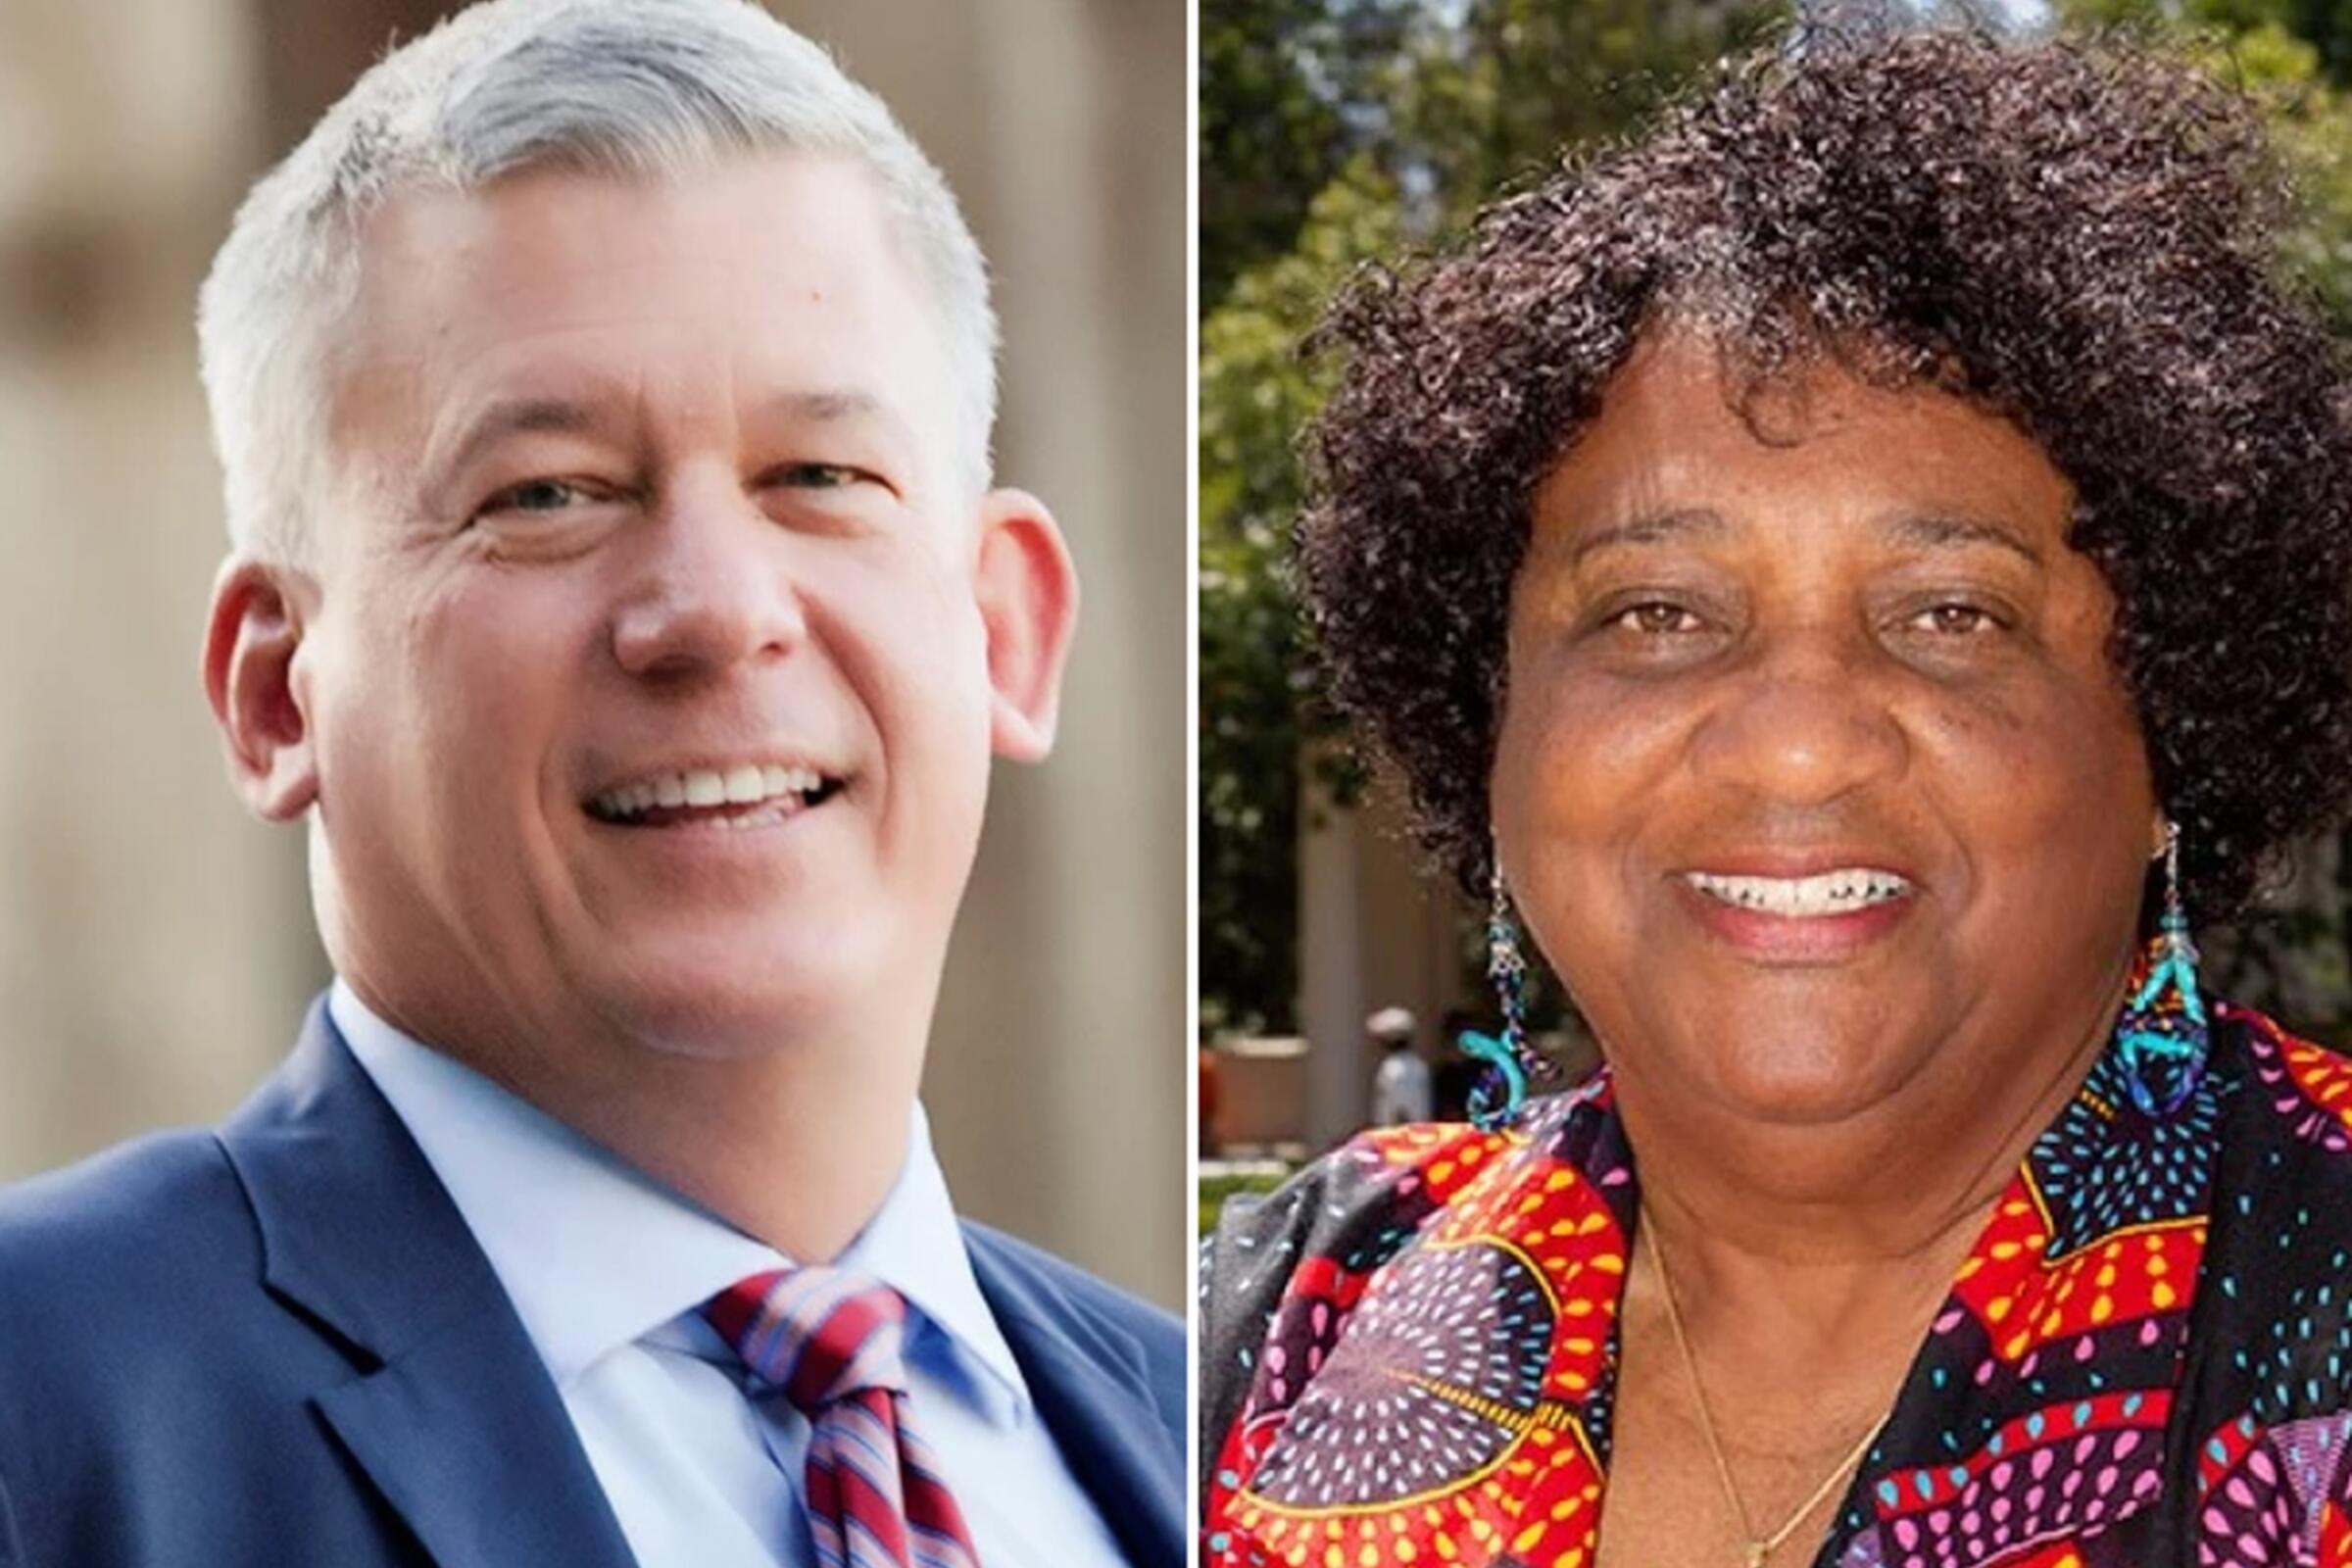 Two candidates for California secretary of state